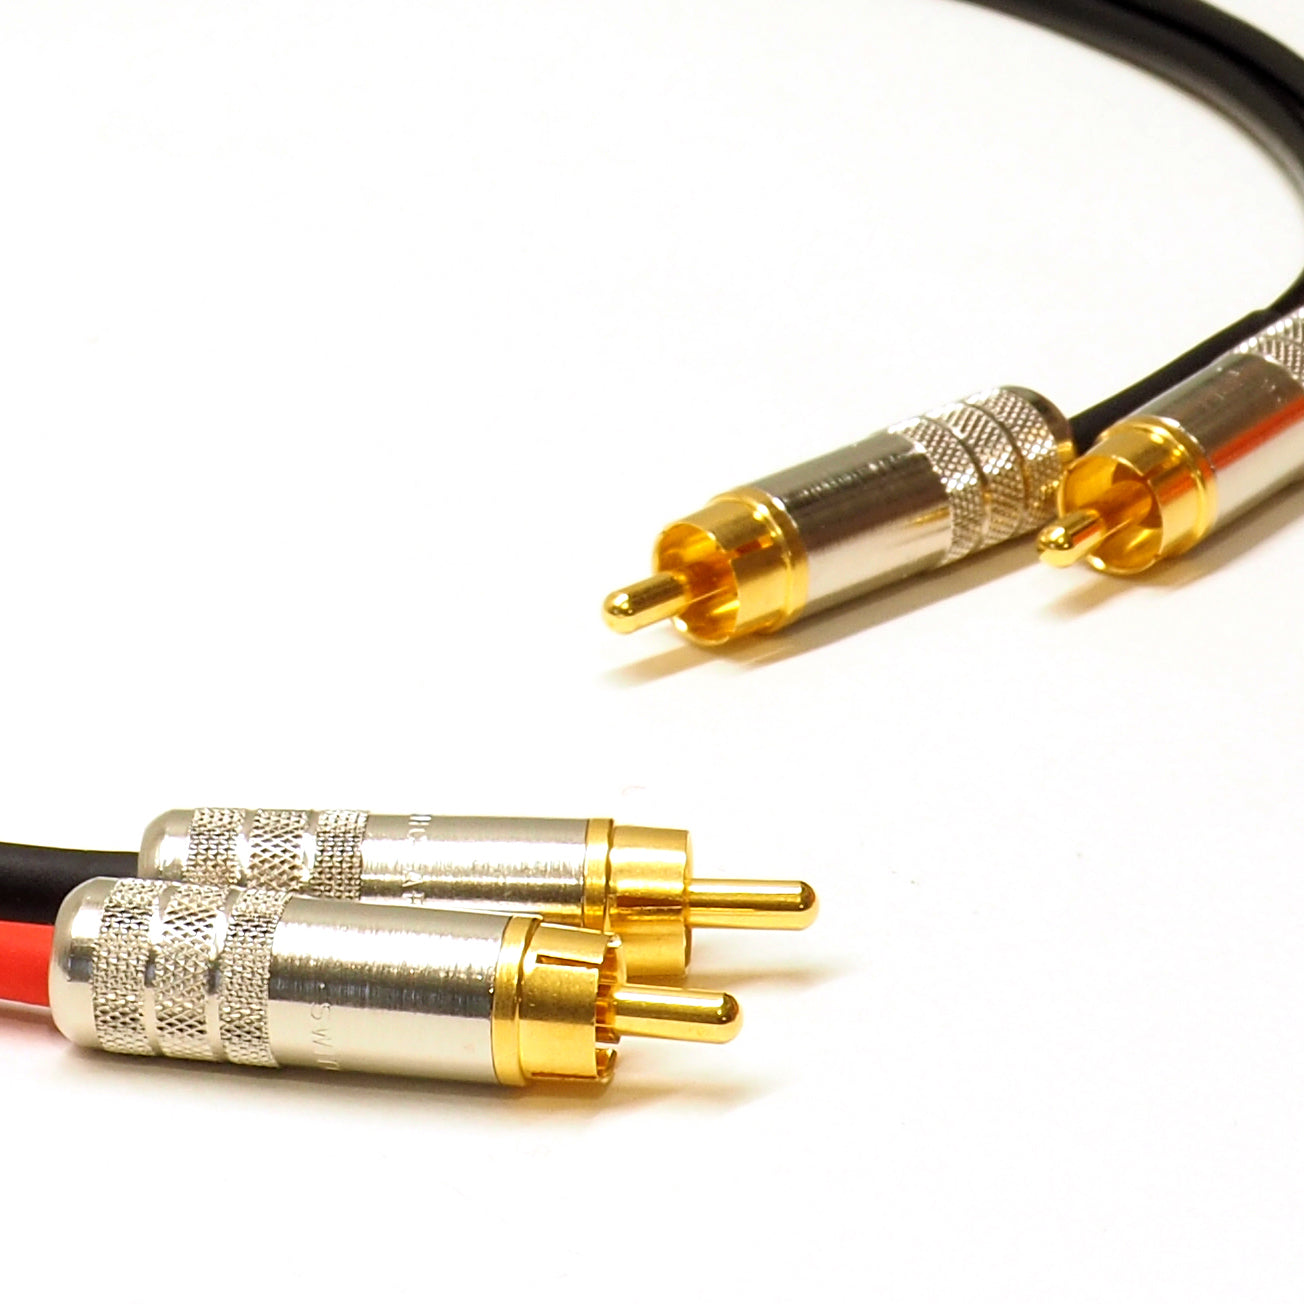 Mogami 2803 RCA to RCA Hi Fi Interconnect Cable (Pair) w/ Gold Switchcraft Connectors